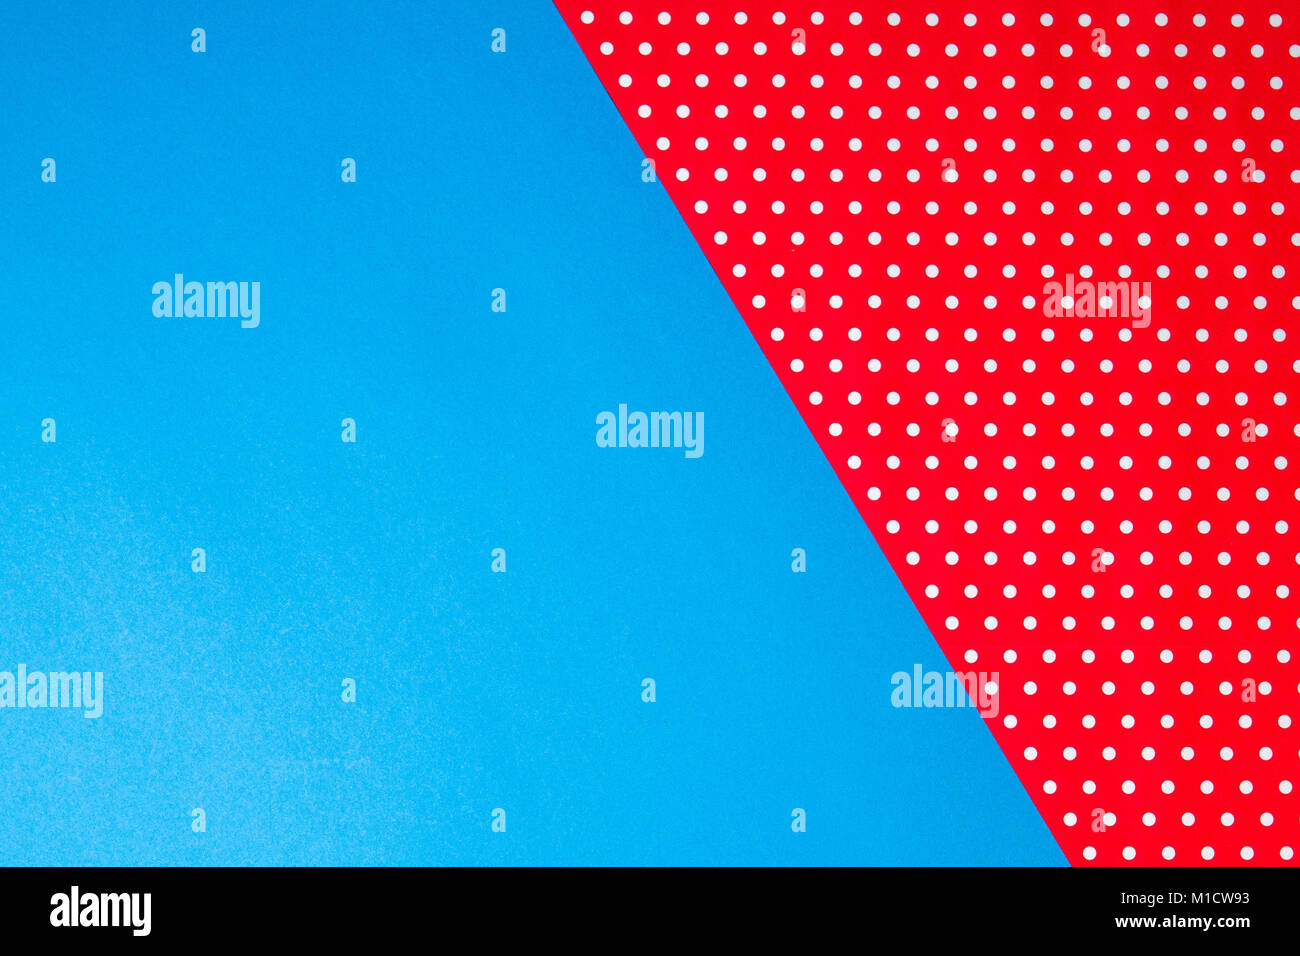 Abstract geometric blue and red polka dot paper background. Stock Photo